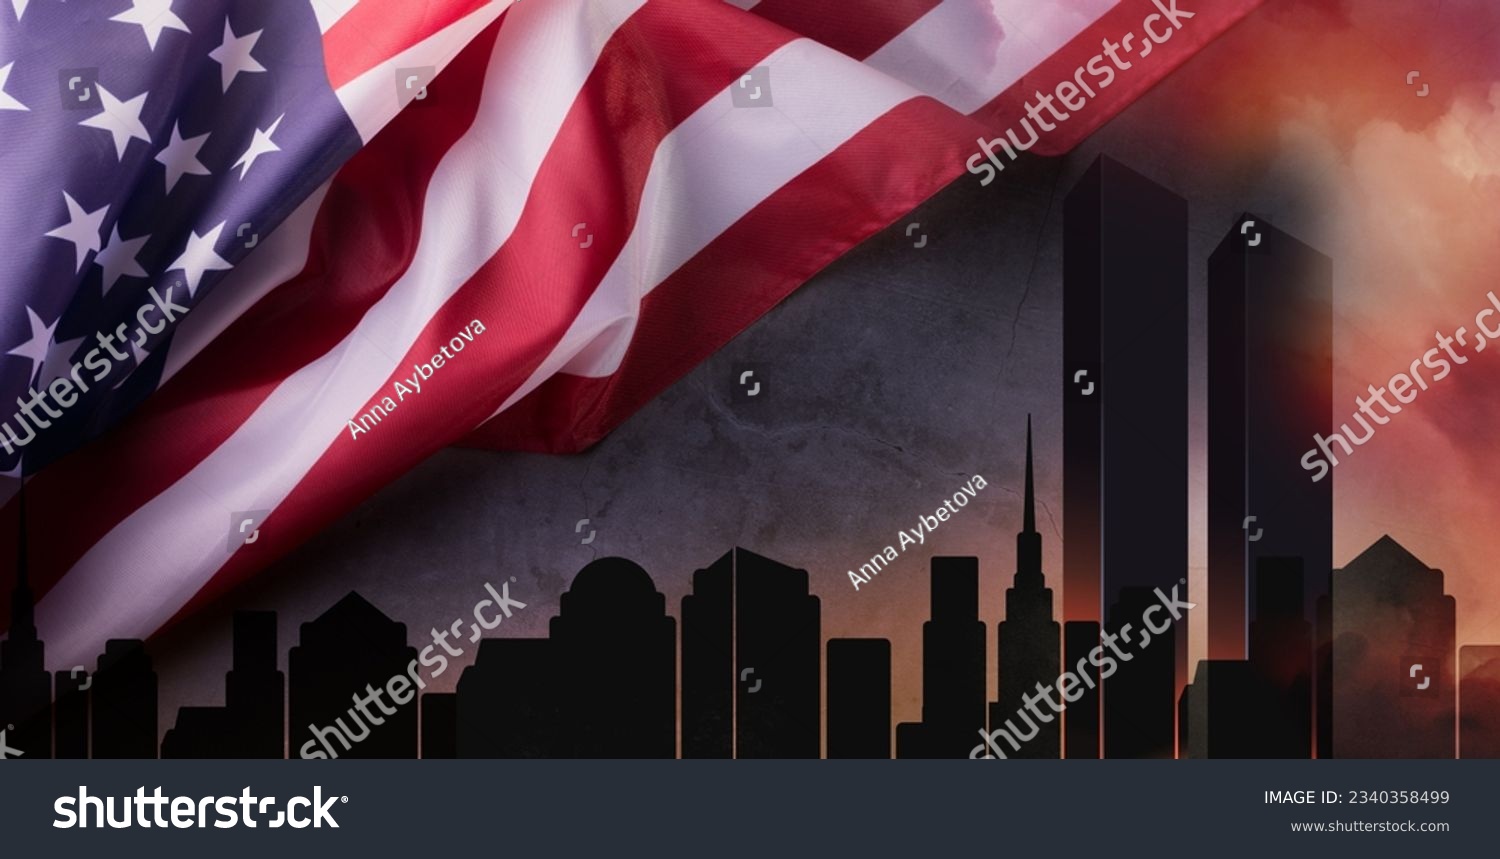 Patriot Day banner template. September 11 Memorial Day for the United States of America concept. Remembrance Day for the Victims of the Terrorist Attacks. Patriot Day photo collage. #2340358499